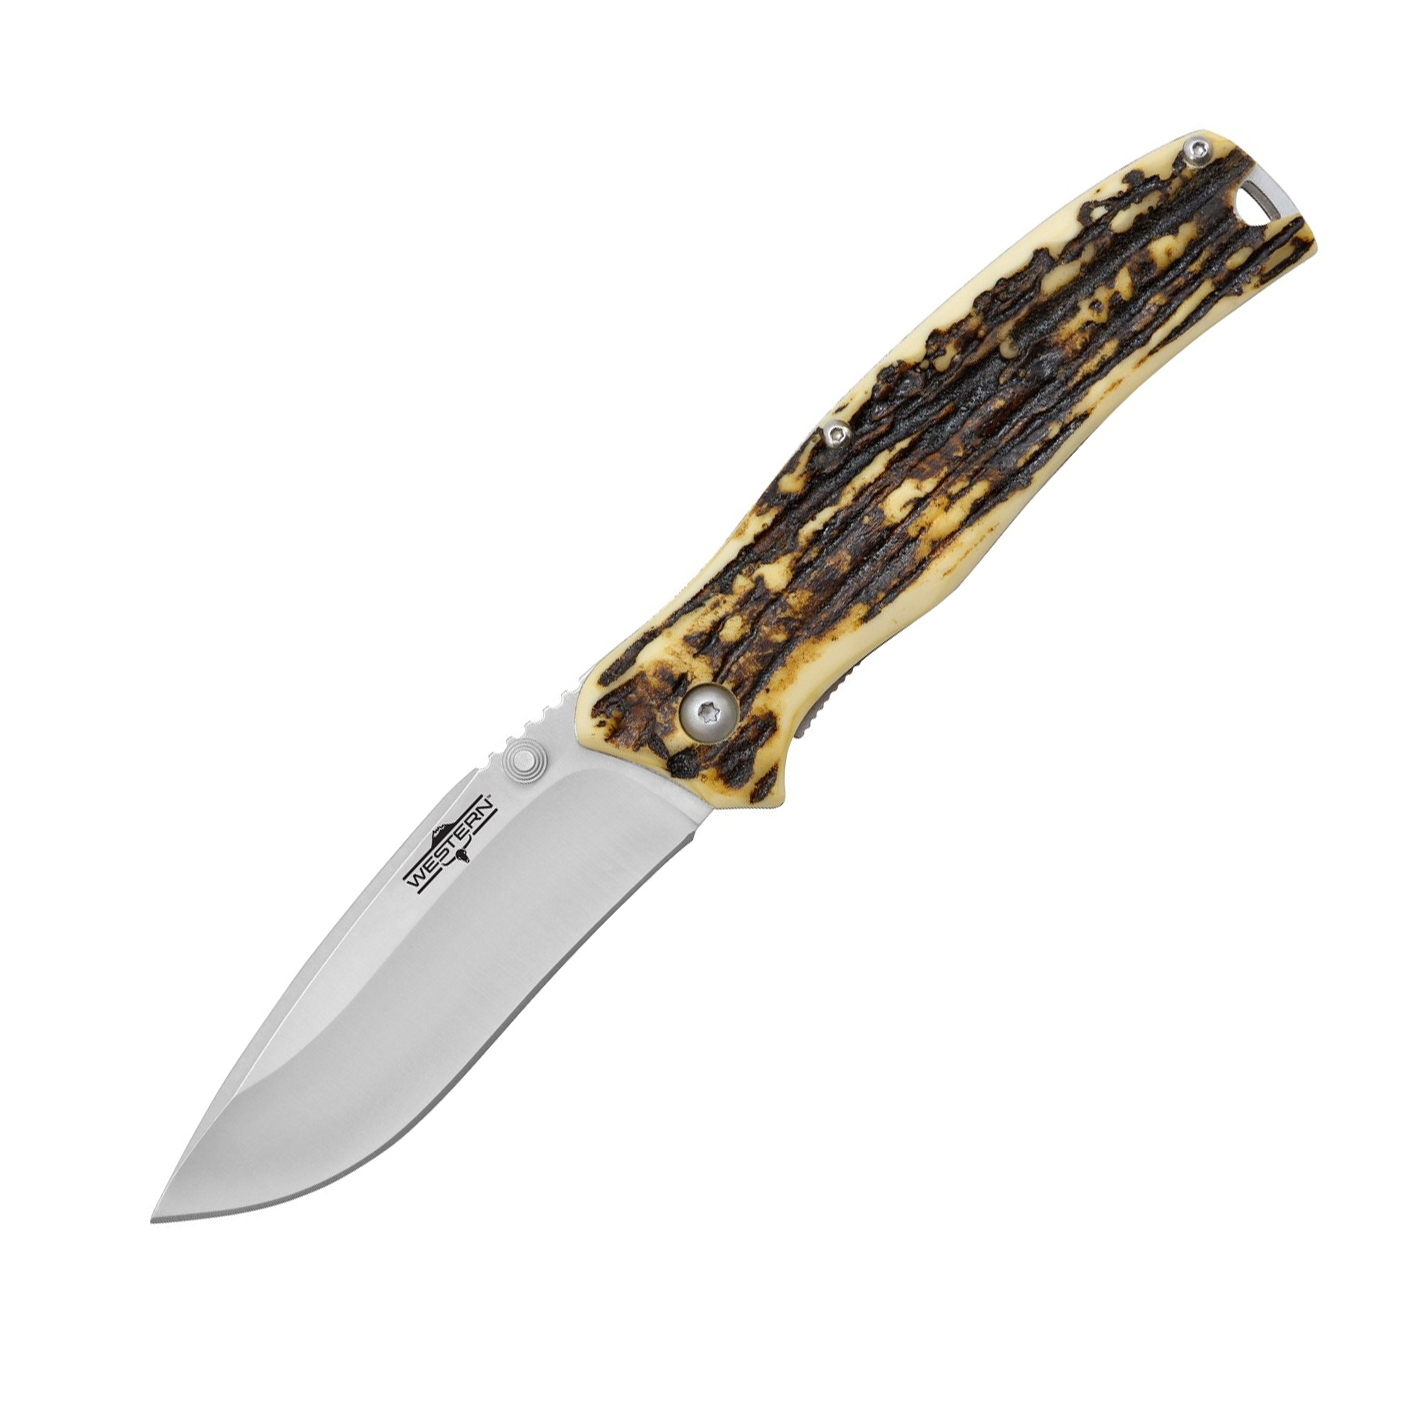   Camillus Western Pronto Drop Point,  420 Stainless Steel,  Delrin